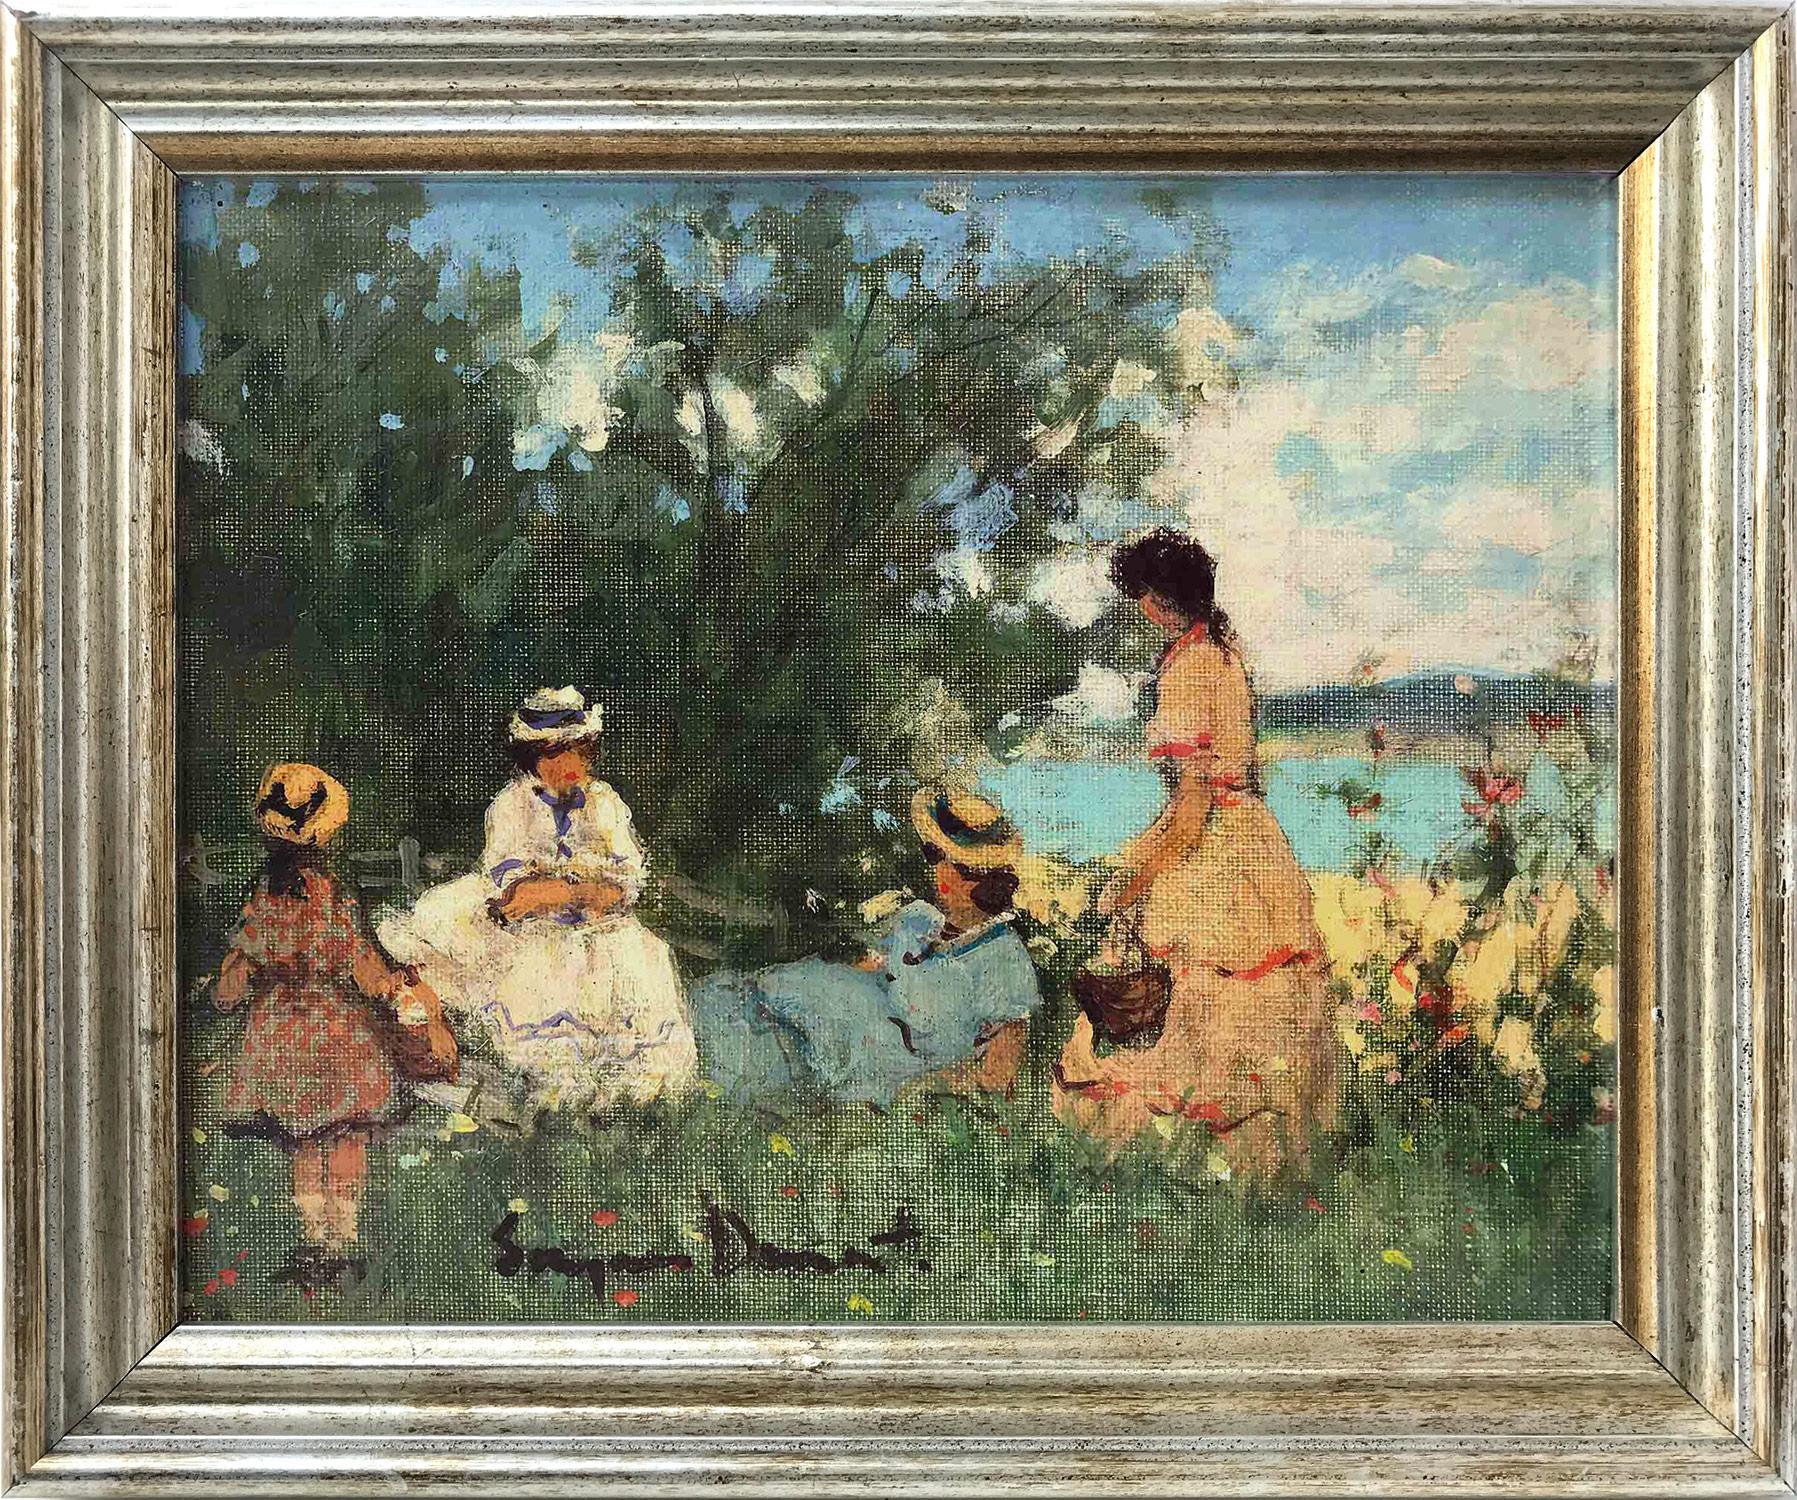 Suzanne Demarest  Figurative Painting - "Picnic Park Scene near the Beach" 20th Century American Oil Painting on Canvas